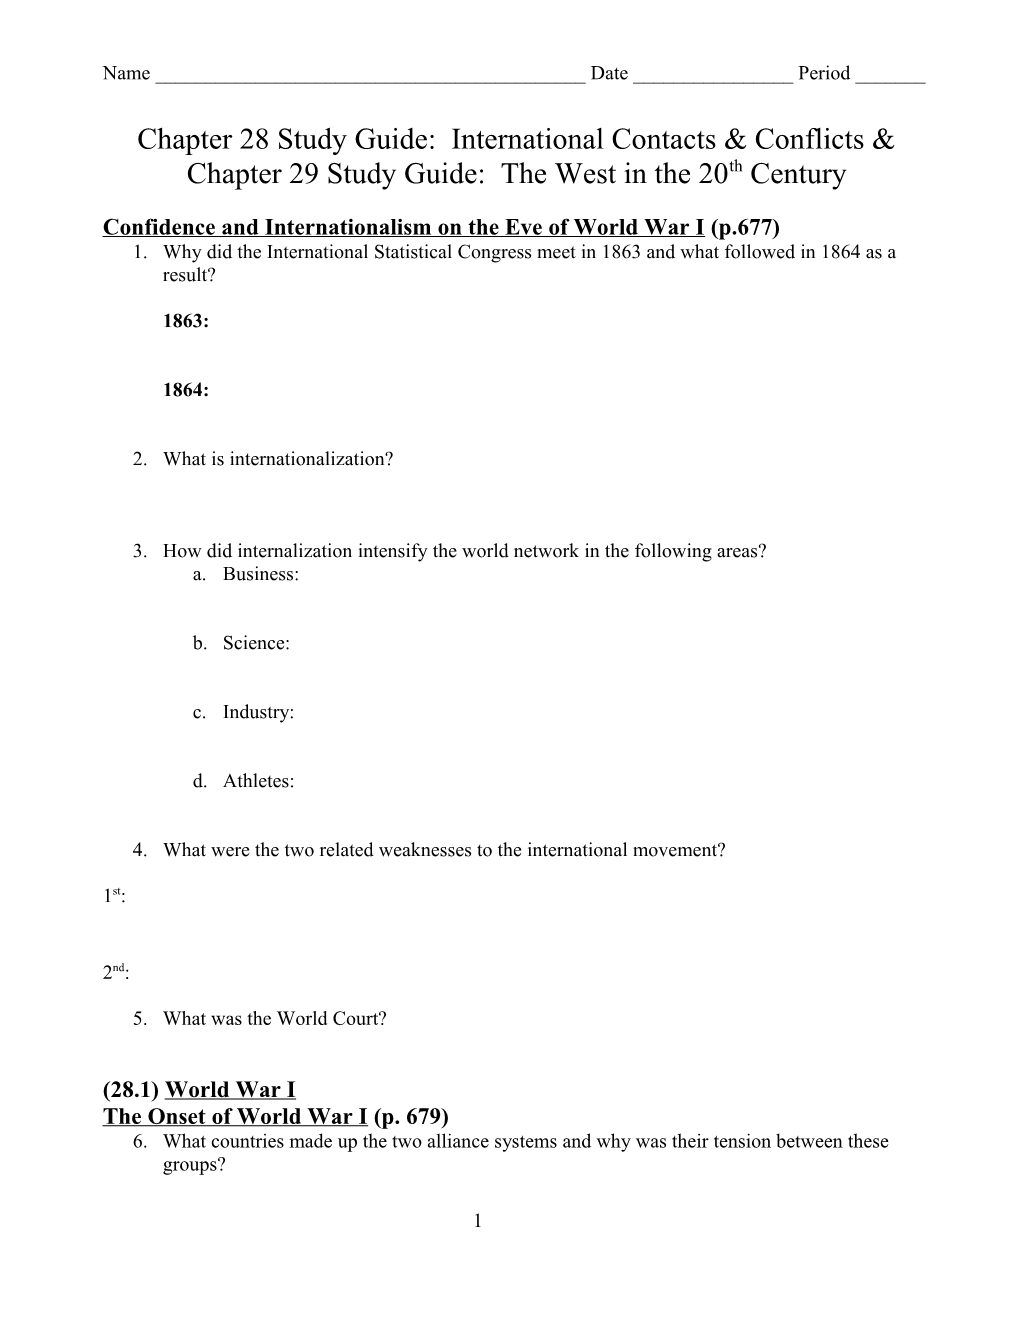 Chapter 19 Study Guide- Latin America